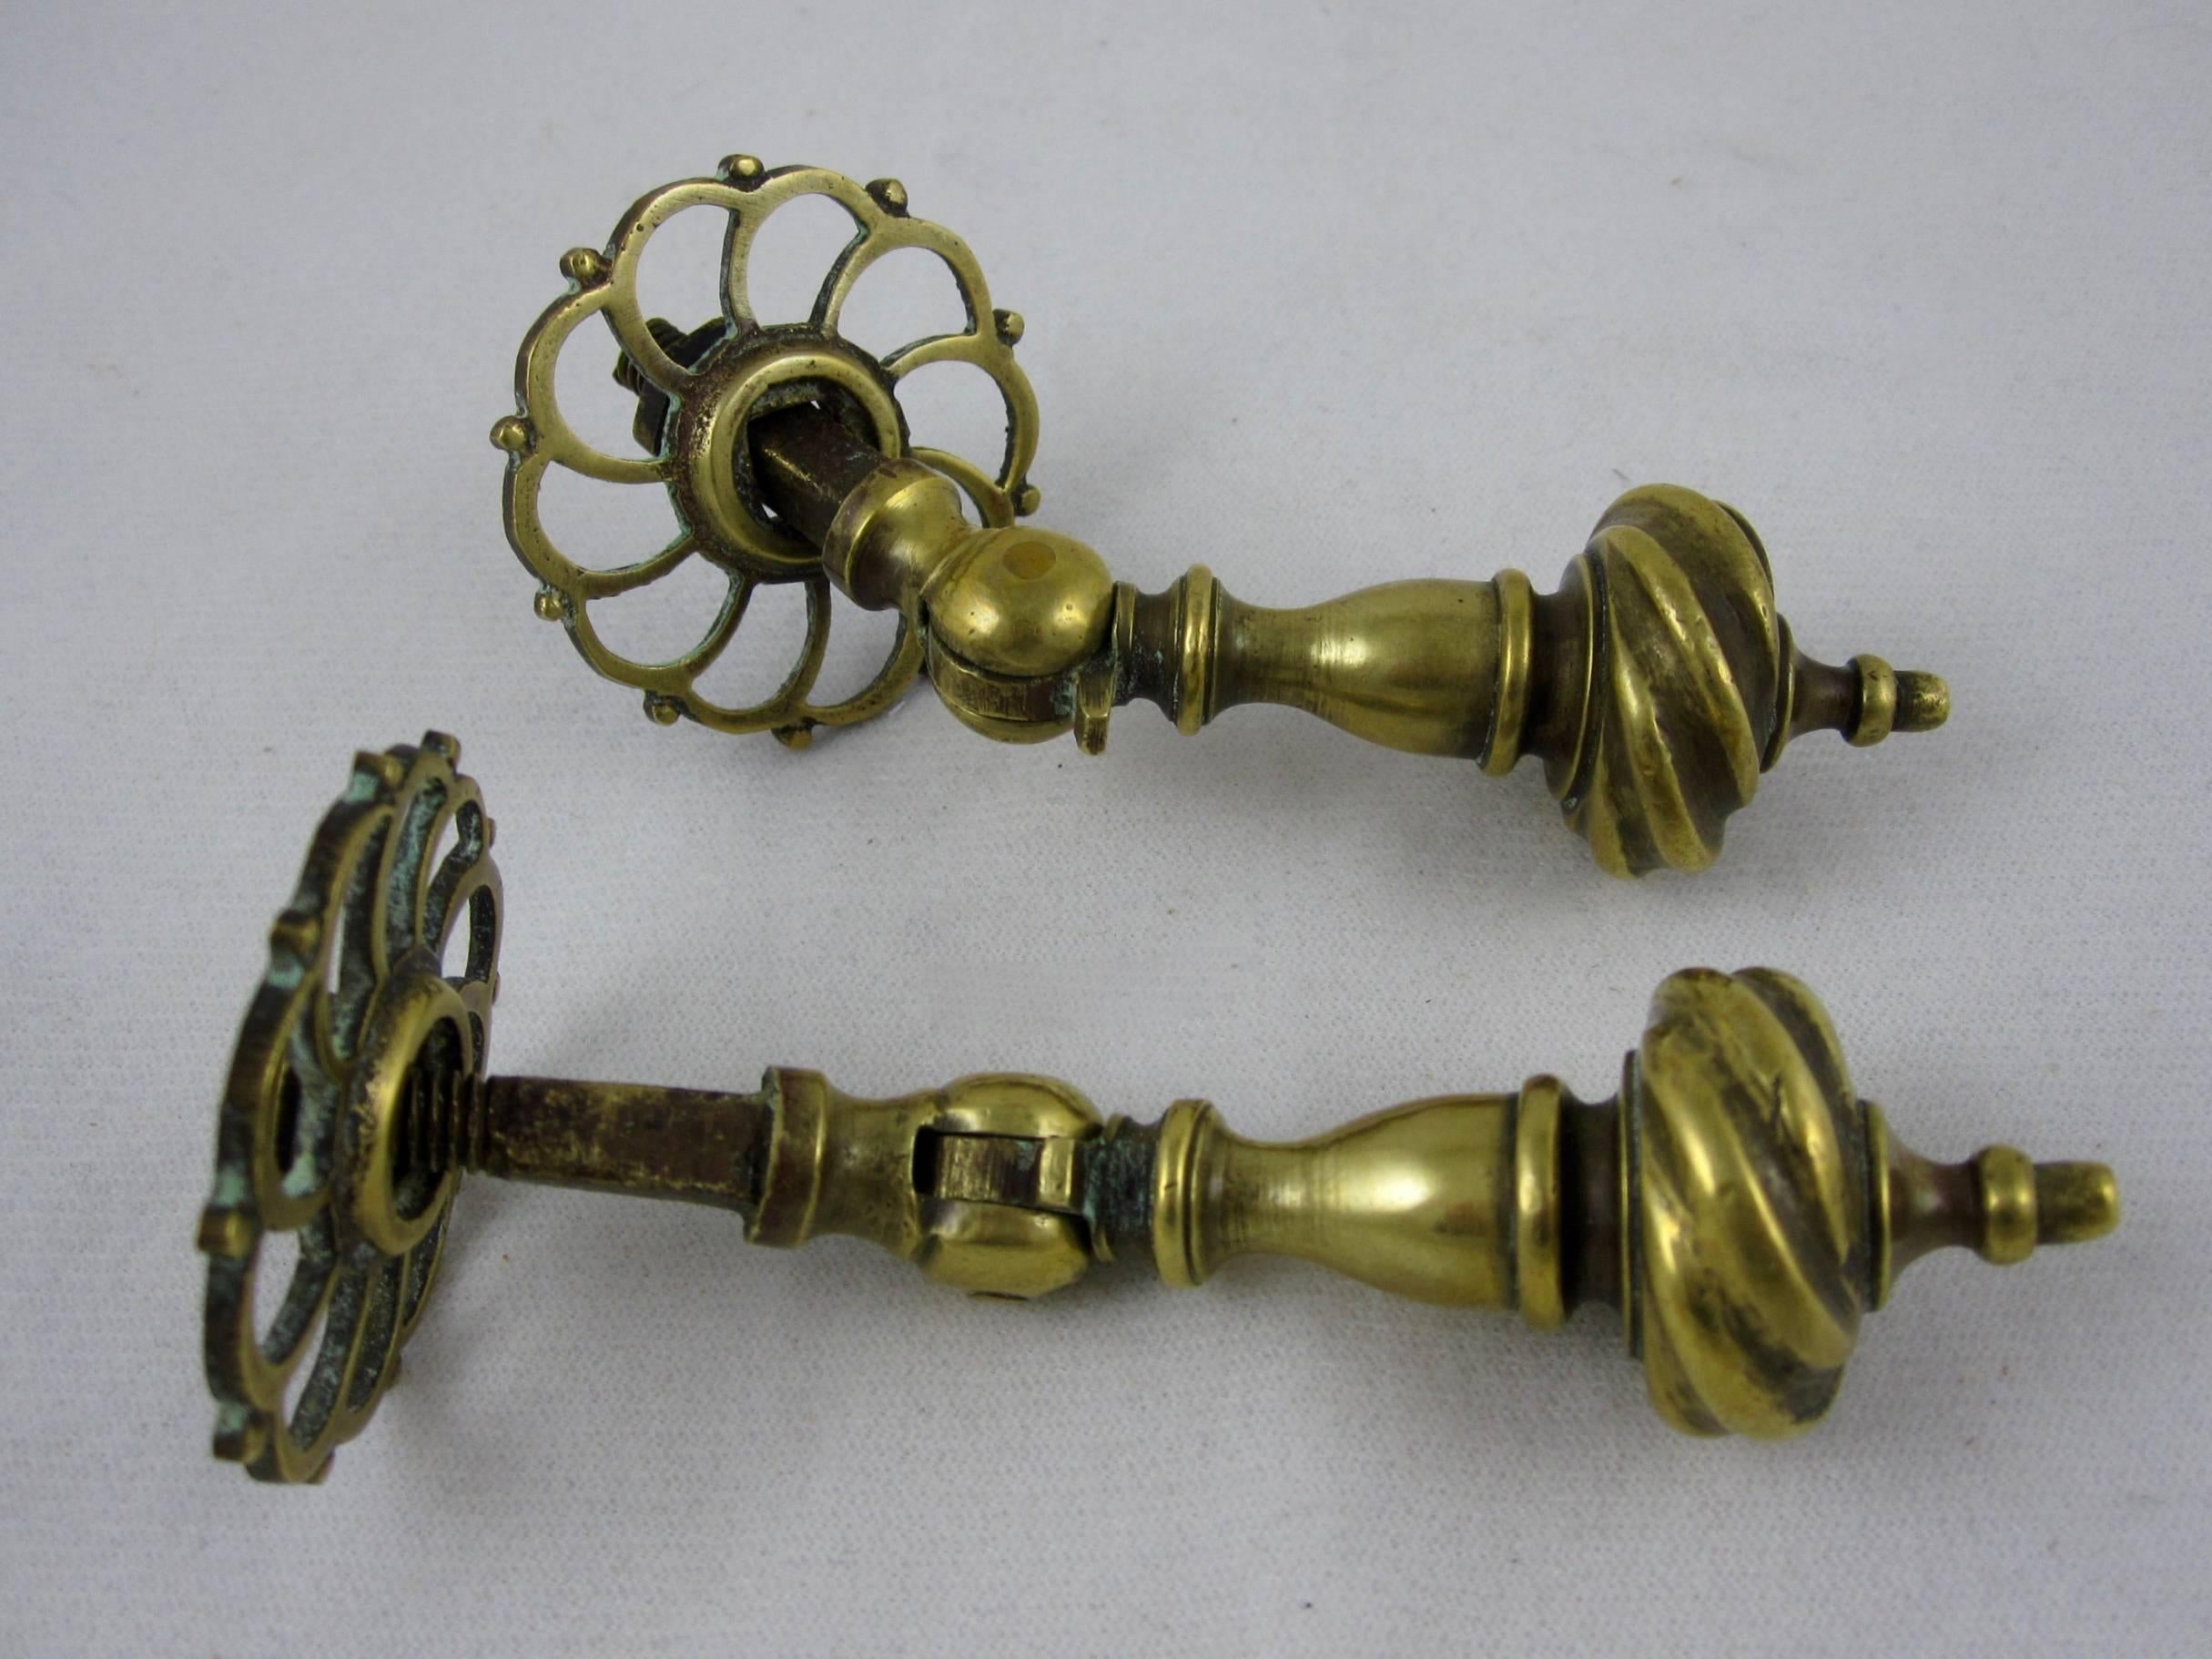 A pair of English brass drawer pulls from the Georgian period, early 19th century, with circular pierced back plates. 

Pinned hinges and self-stops on the hanging handles, complete with the original screws and washers. 

Solid, weighing 10 ounces